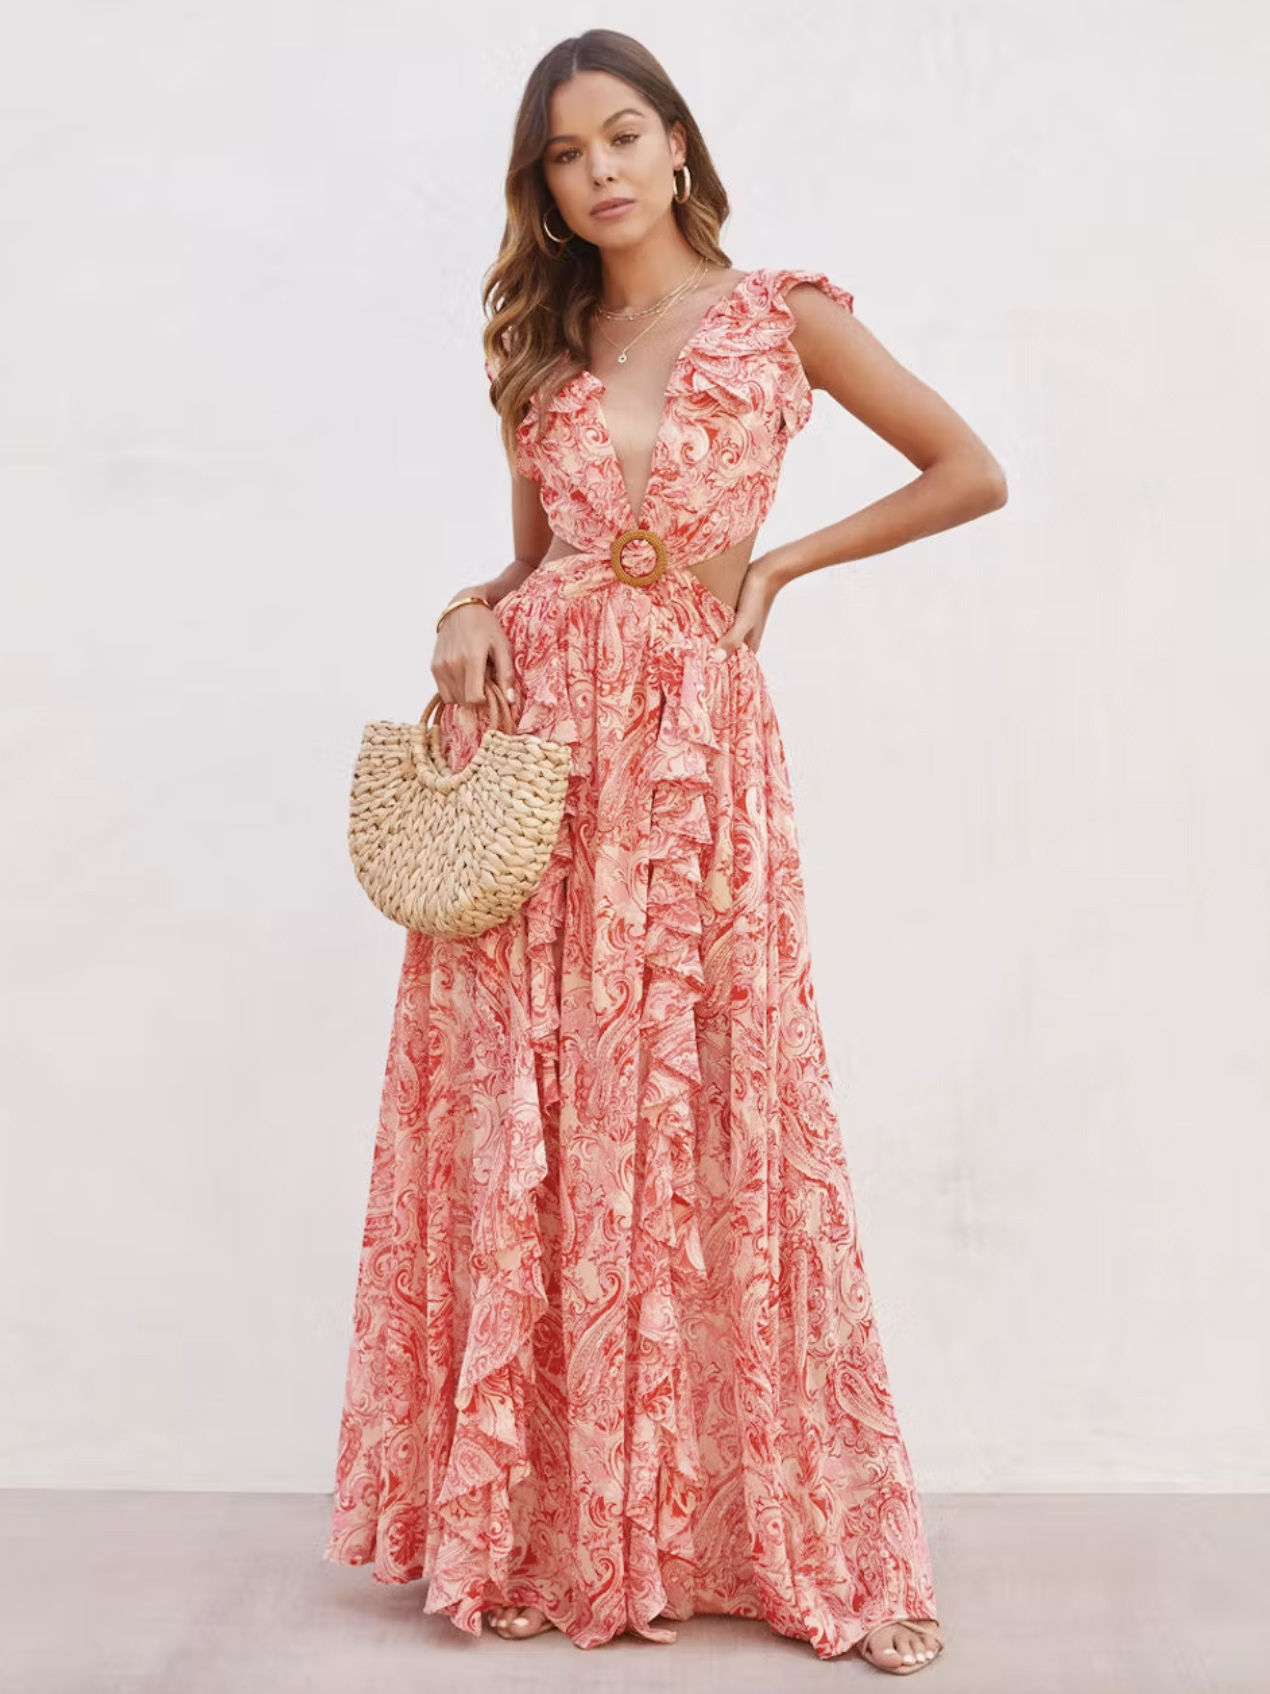 Image from: Milanoo l Floral Maxi Dress Layered Ruffles V Neck Sleeveless Backless Front Slit Sexy Summer Long Dress